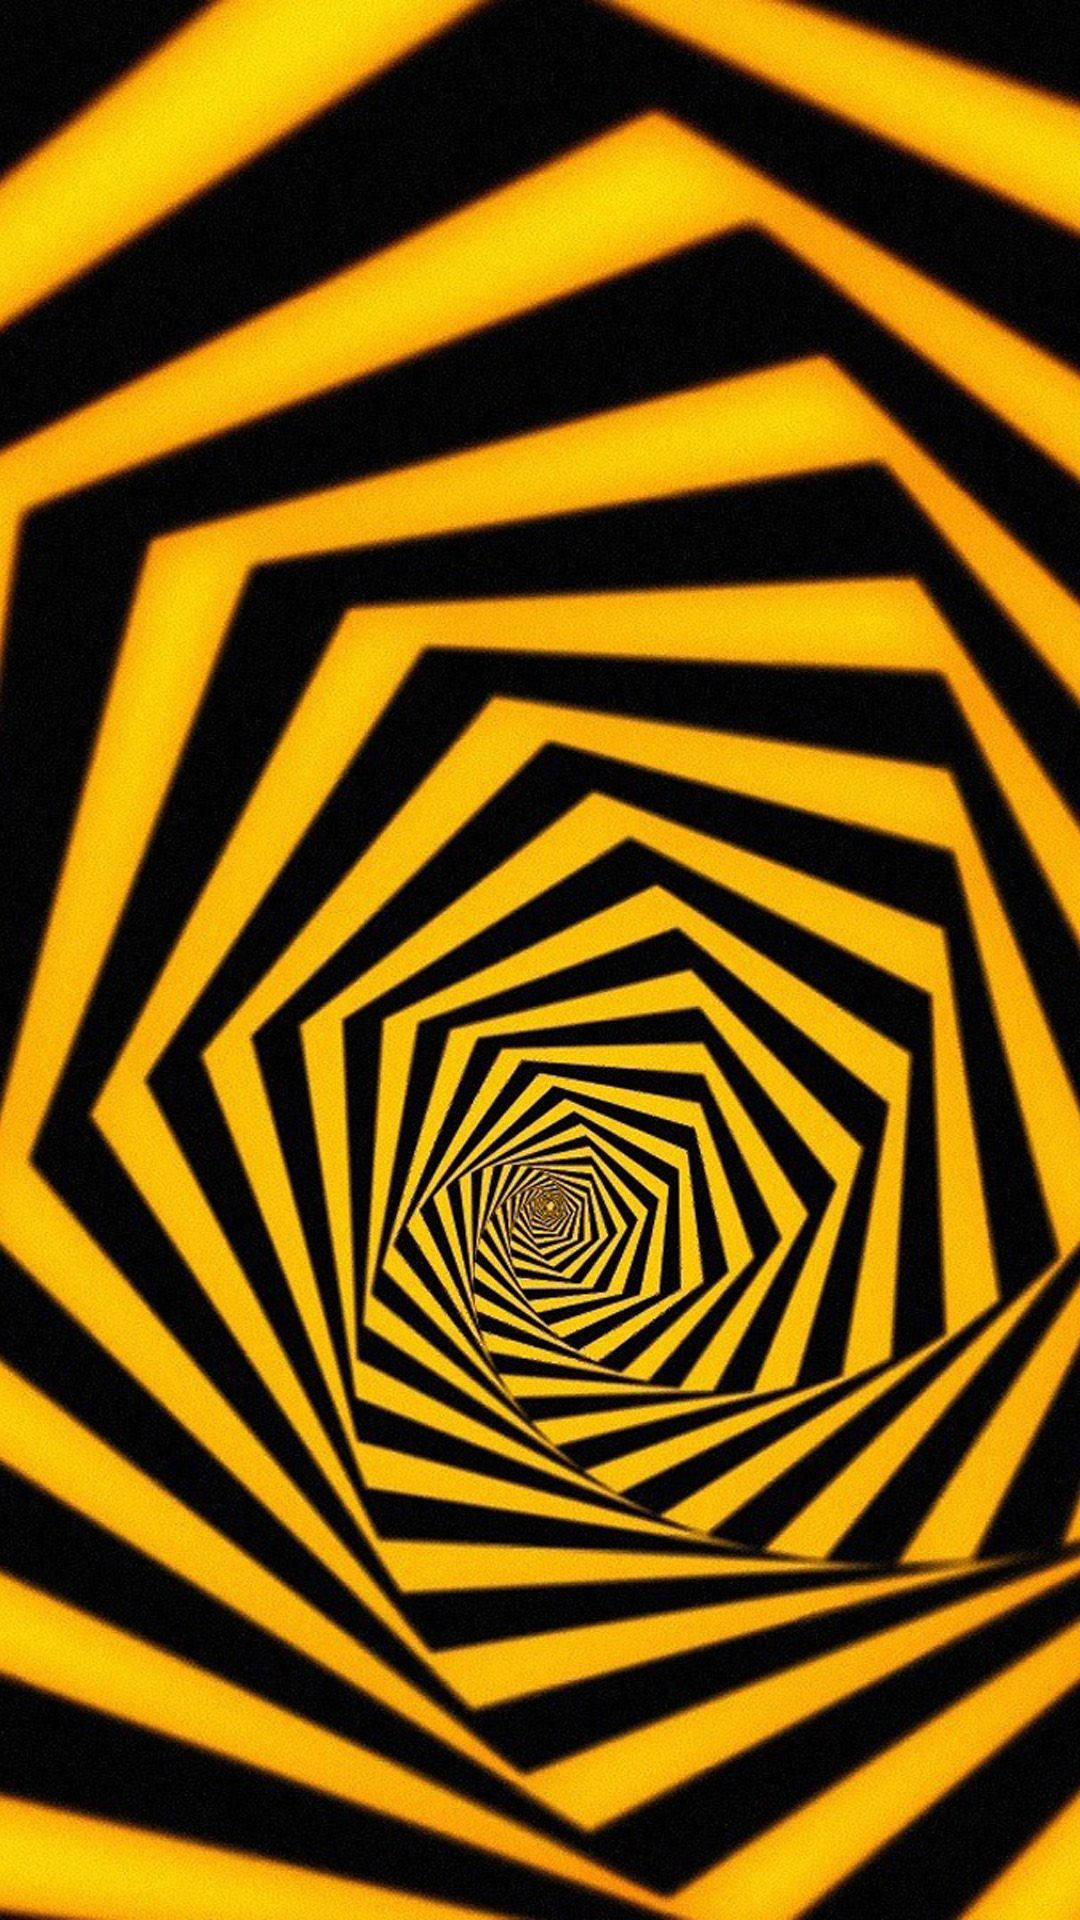 3d Iphone Black And Yellow Spiral Wallpaper